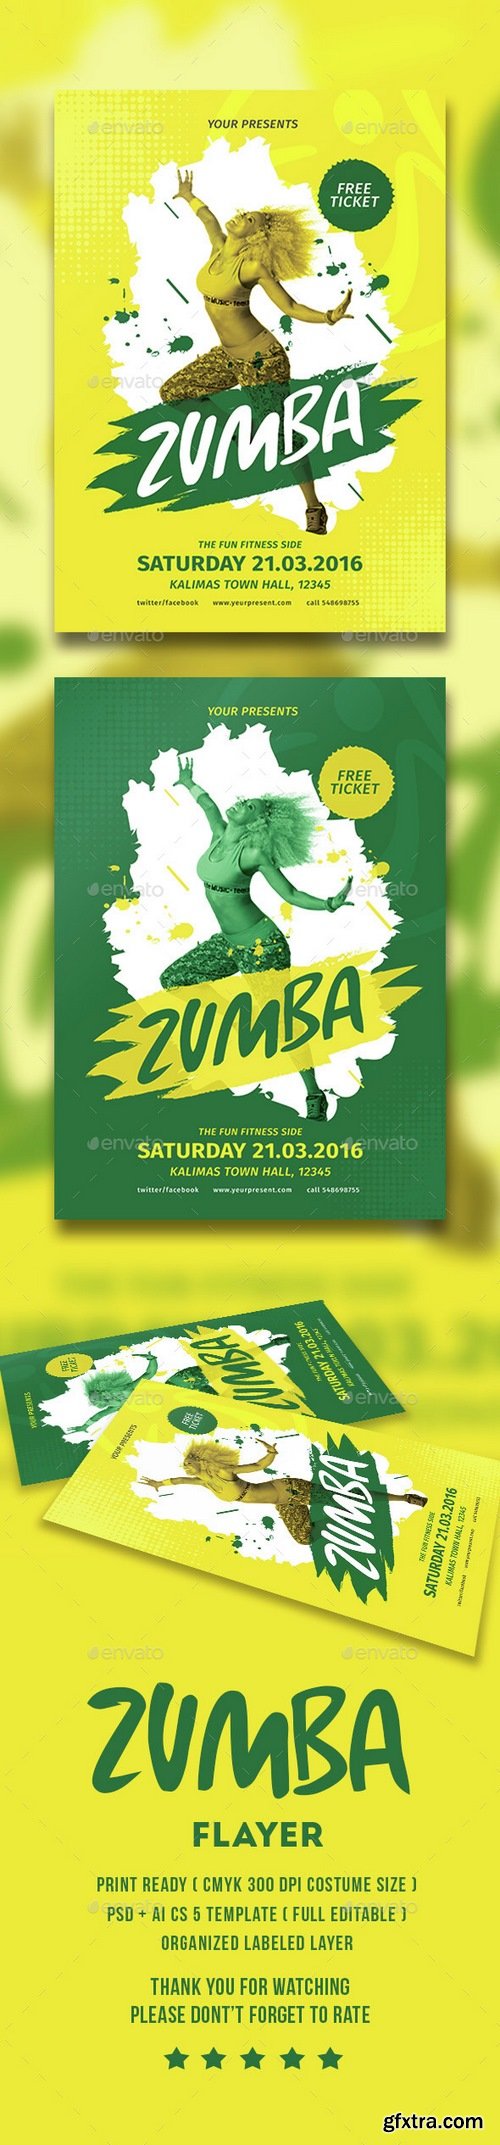 Graphicriver - Zumba Party Flyer 15359489